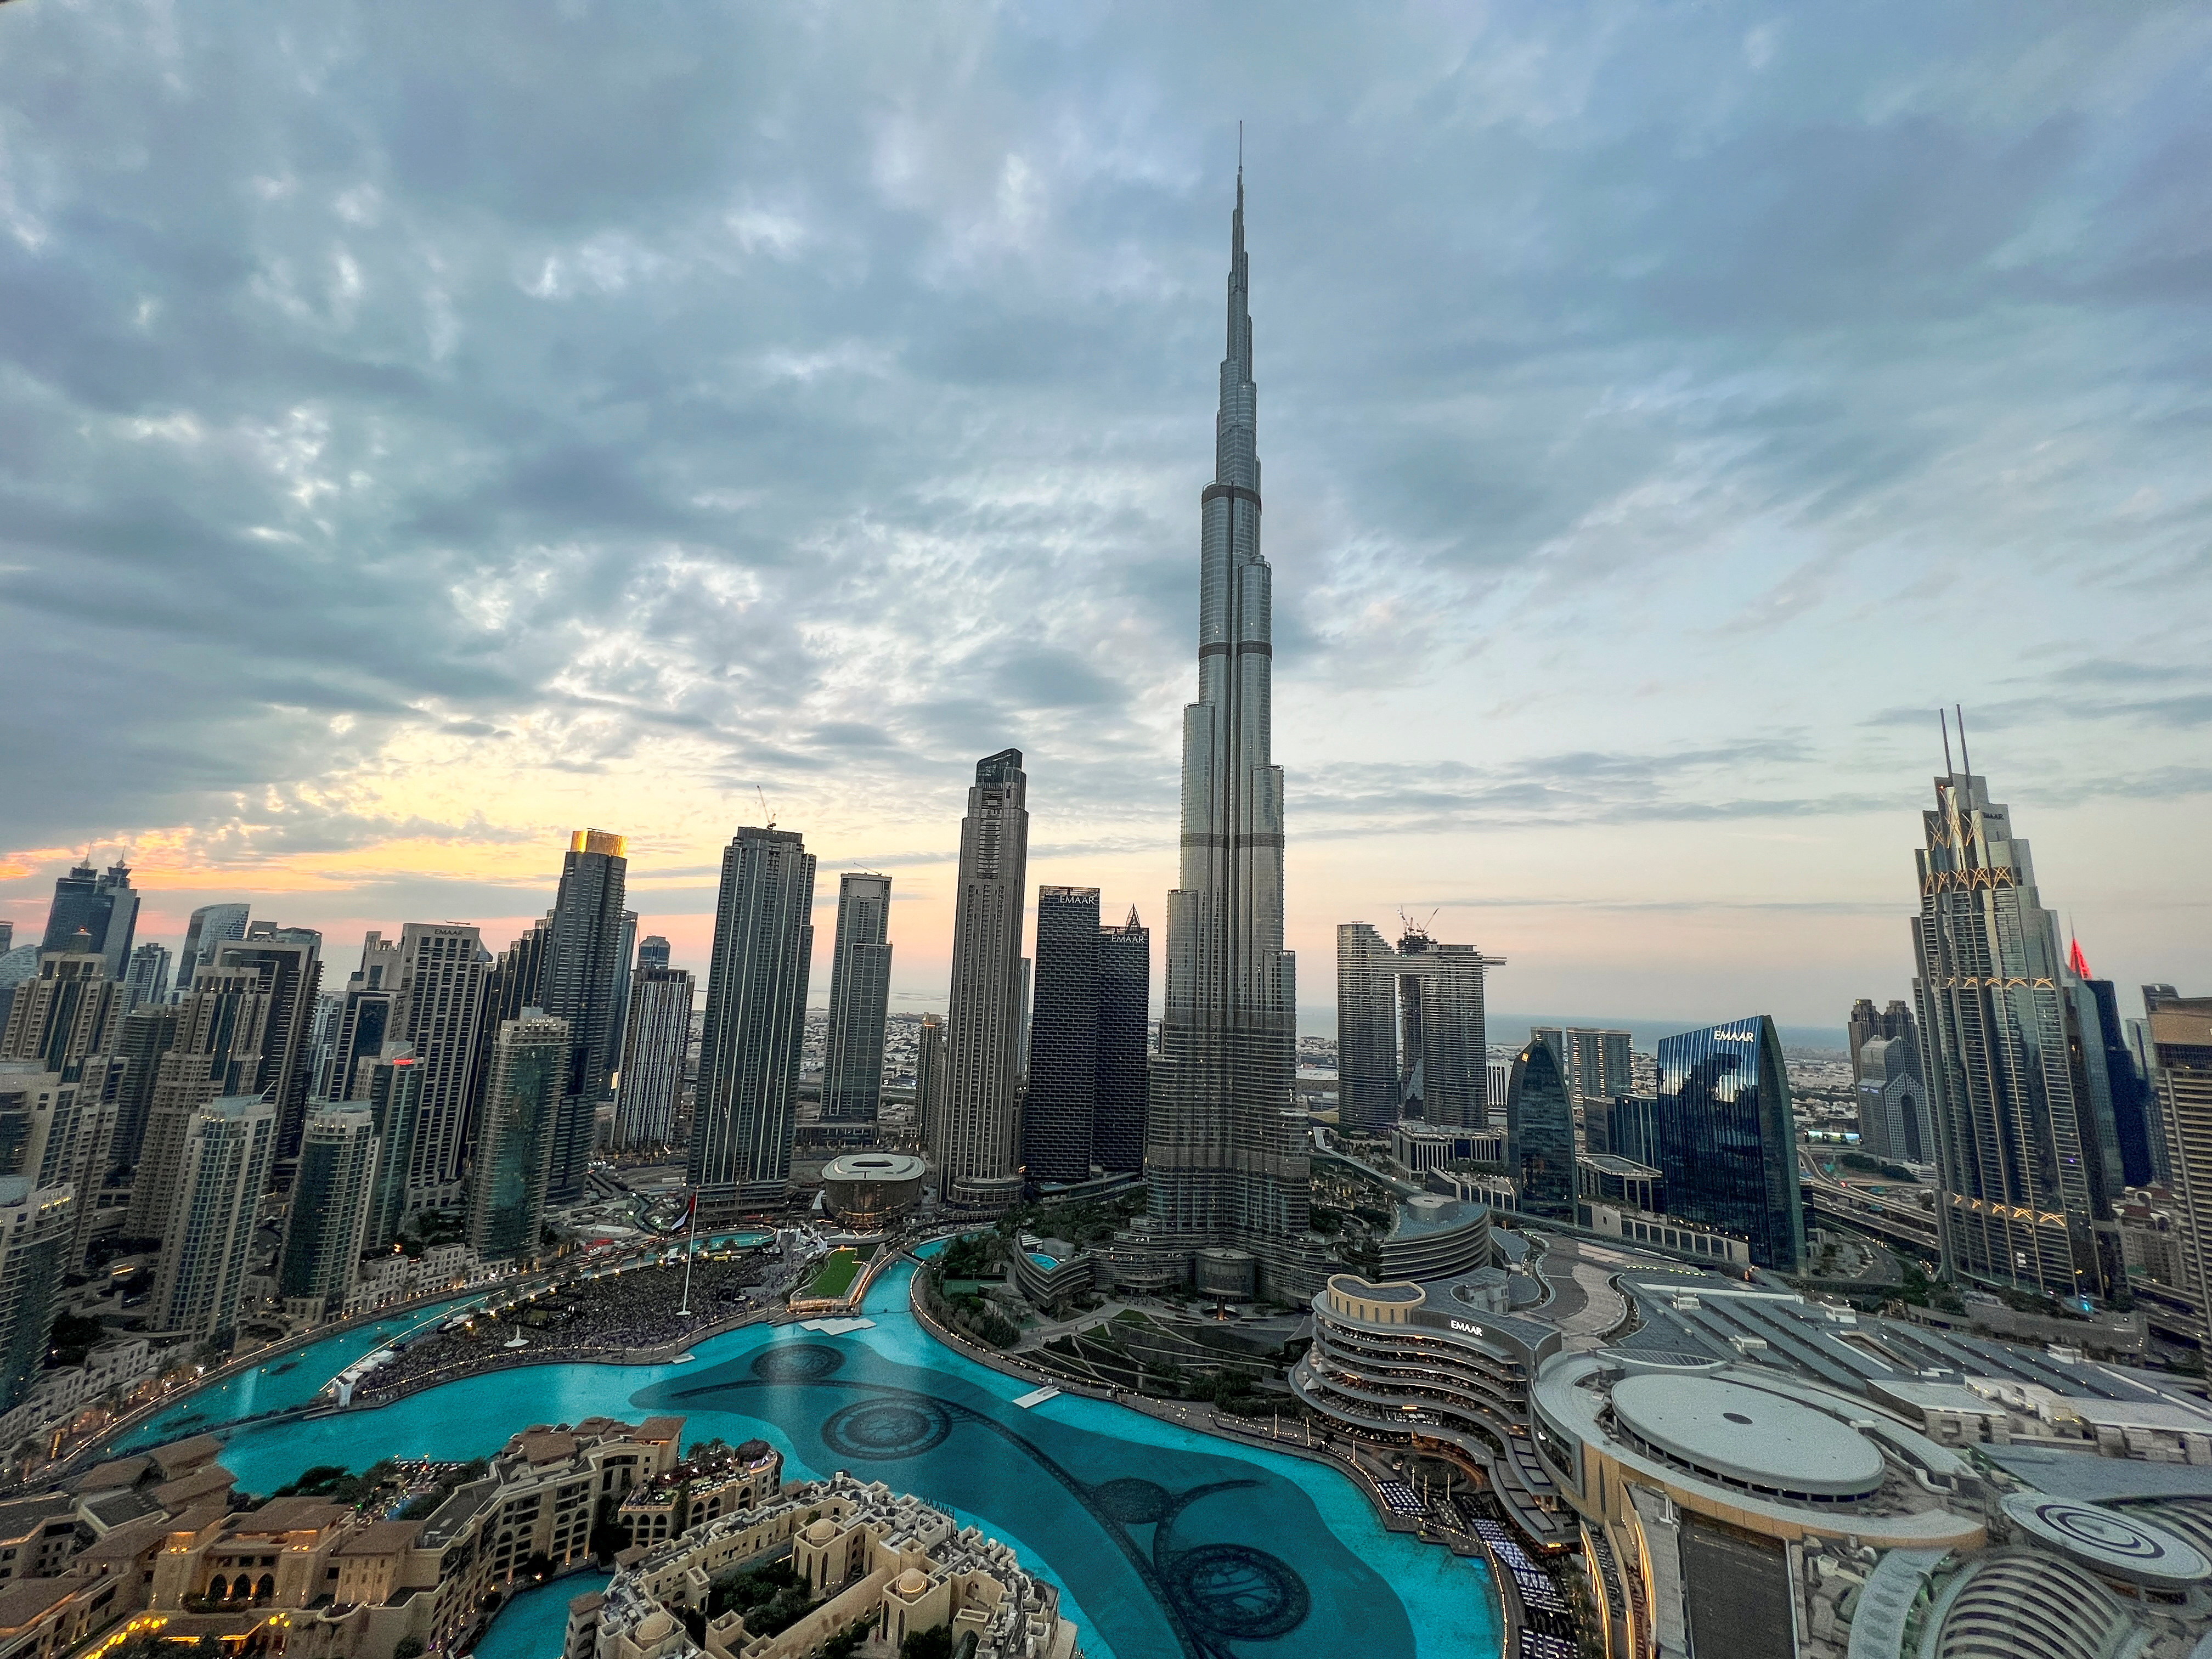 Dubai chases long-term growth as property booms, seeks to blunt debt risk |  Reuters